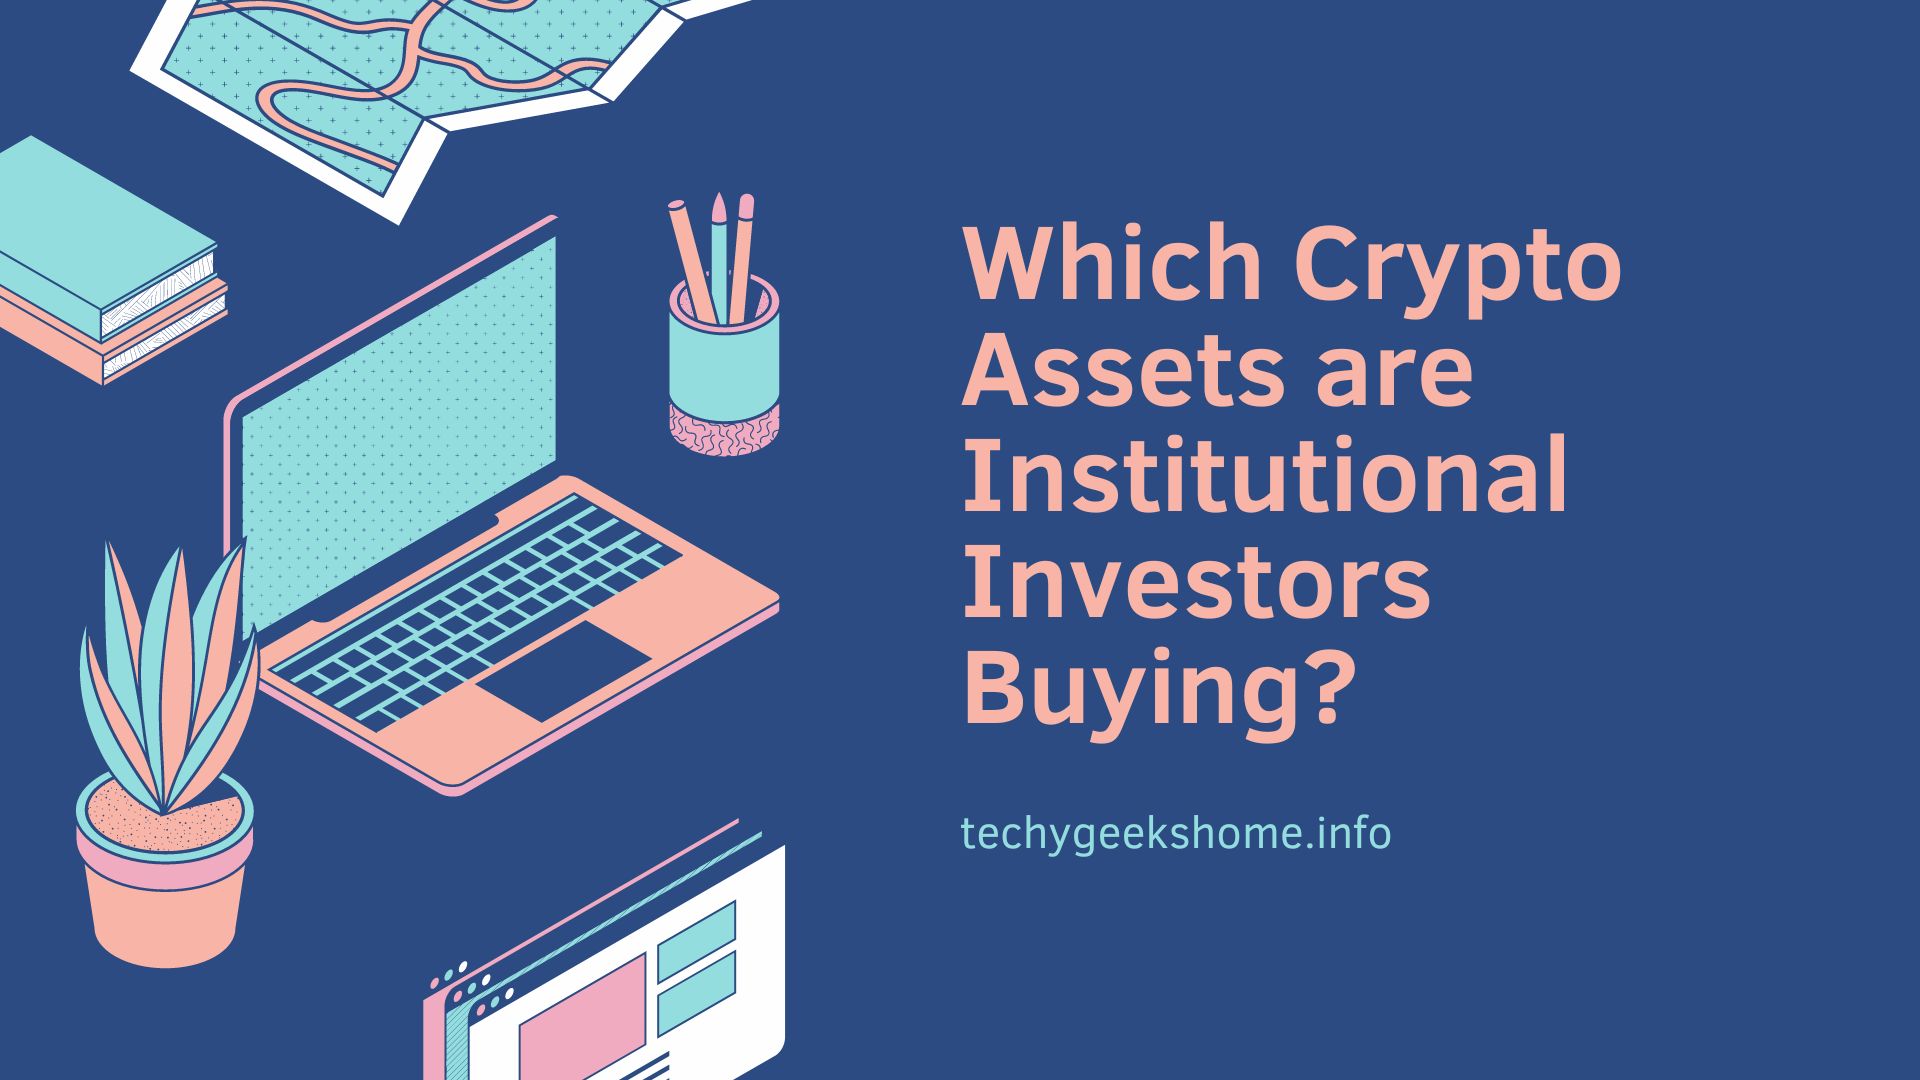 Which Crypto Assets are Institutional Investors Buying?